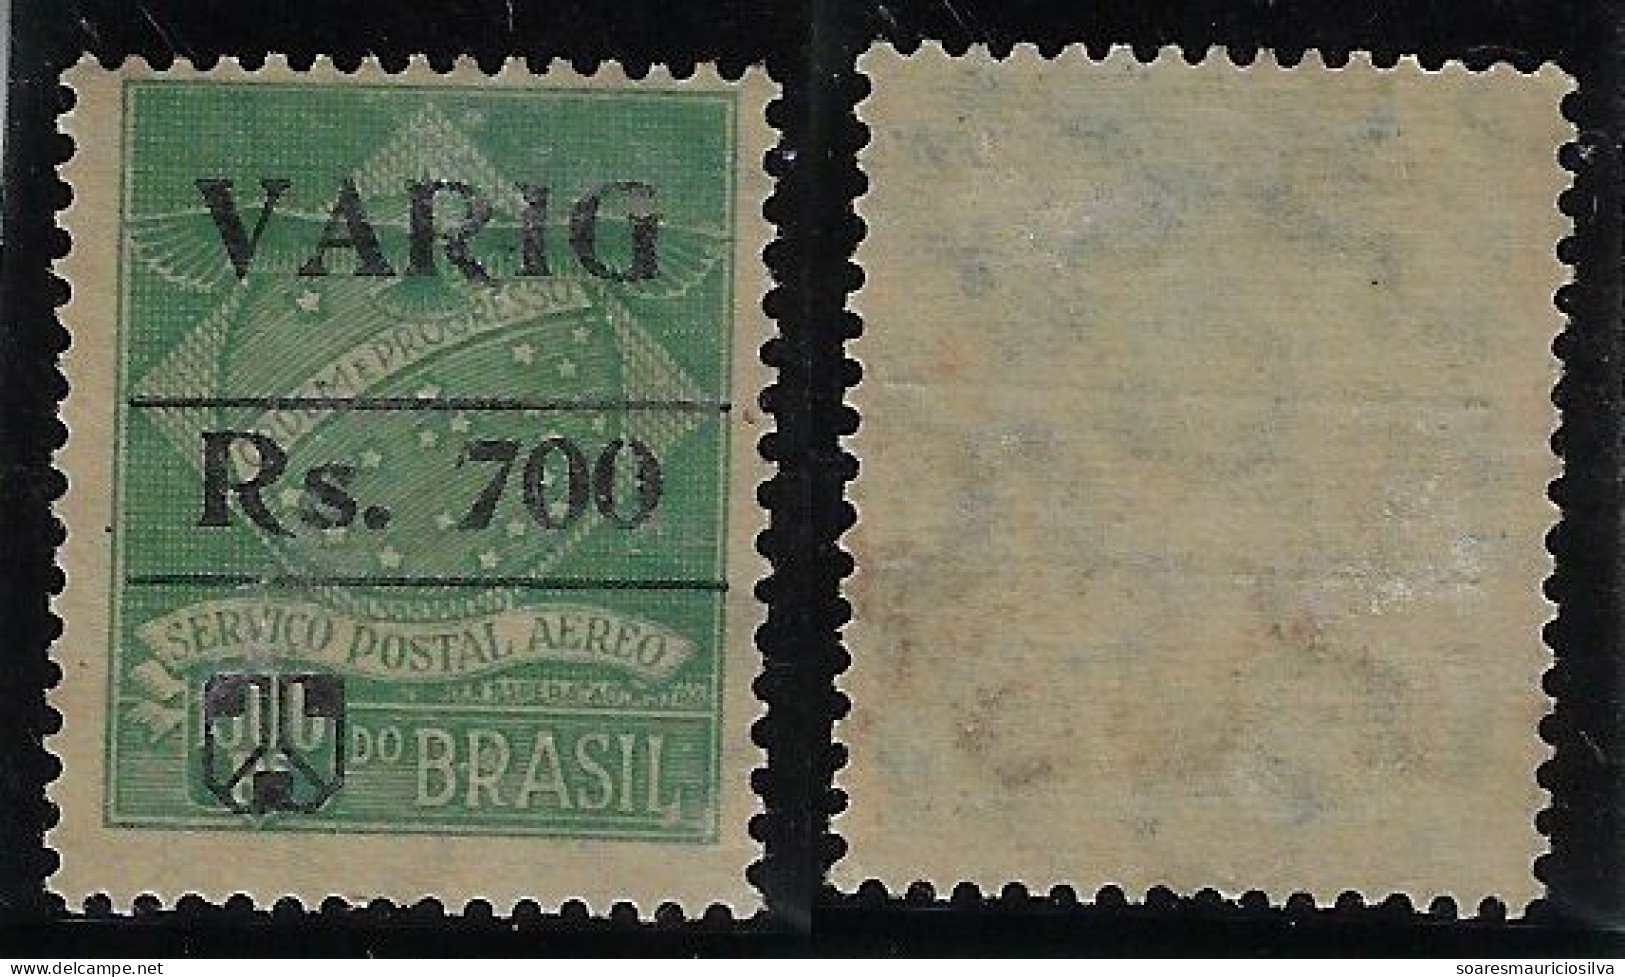 Brazil Year 1930 Varig Airmail Company RHM-V-8 Stamp Condor With Black Overprint 700 Reis Unused (catalog US$22) - Airmail (Private Companies)